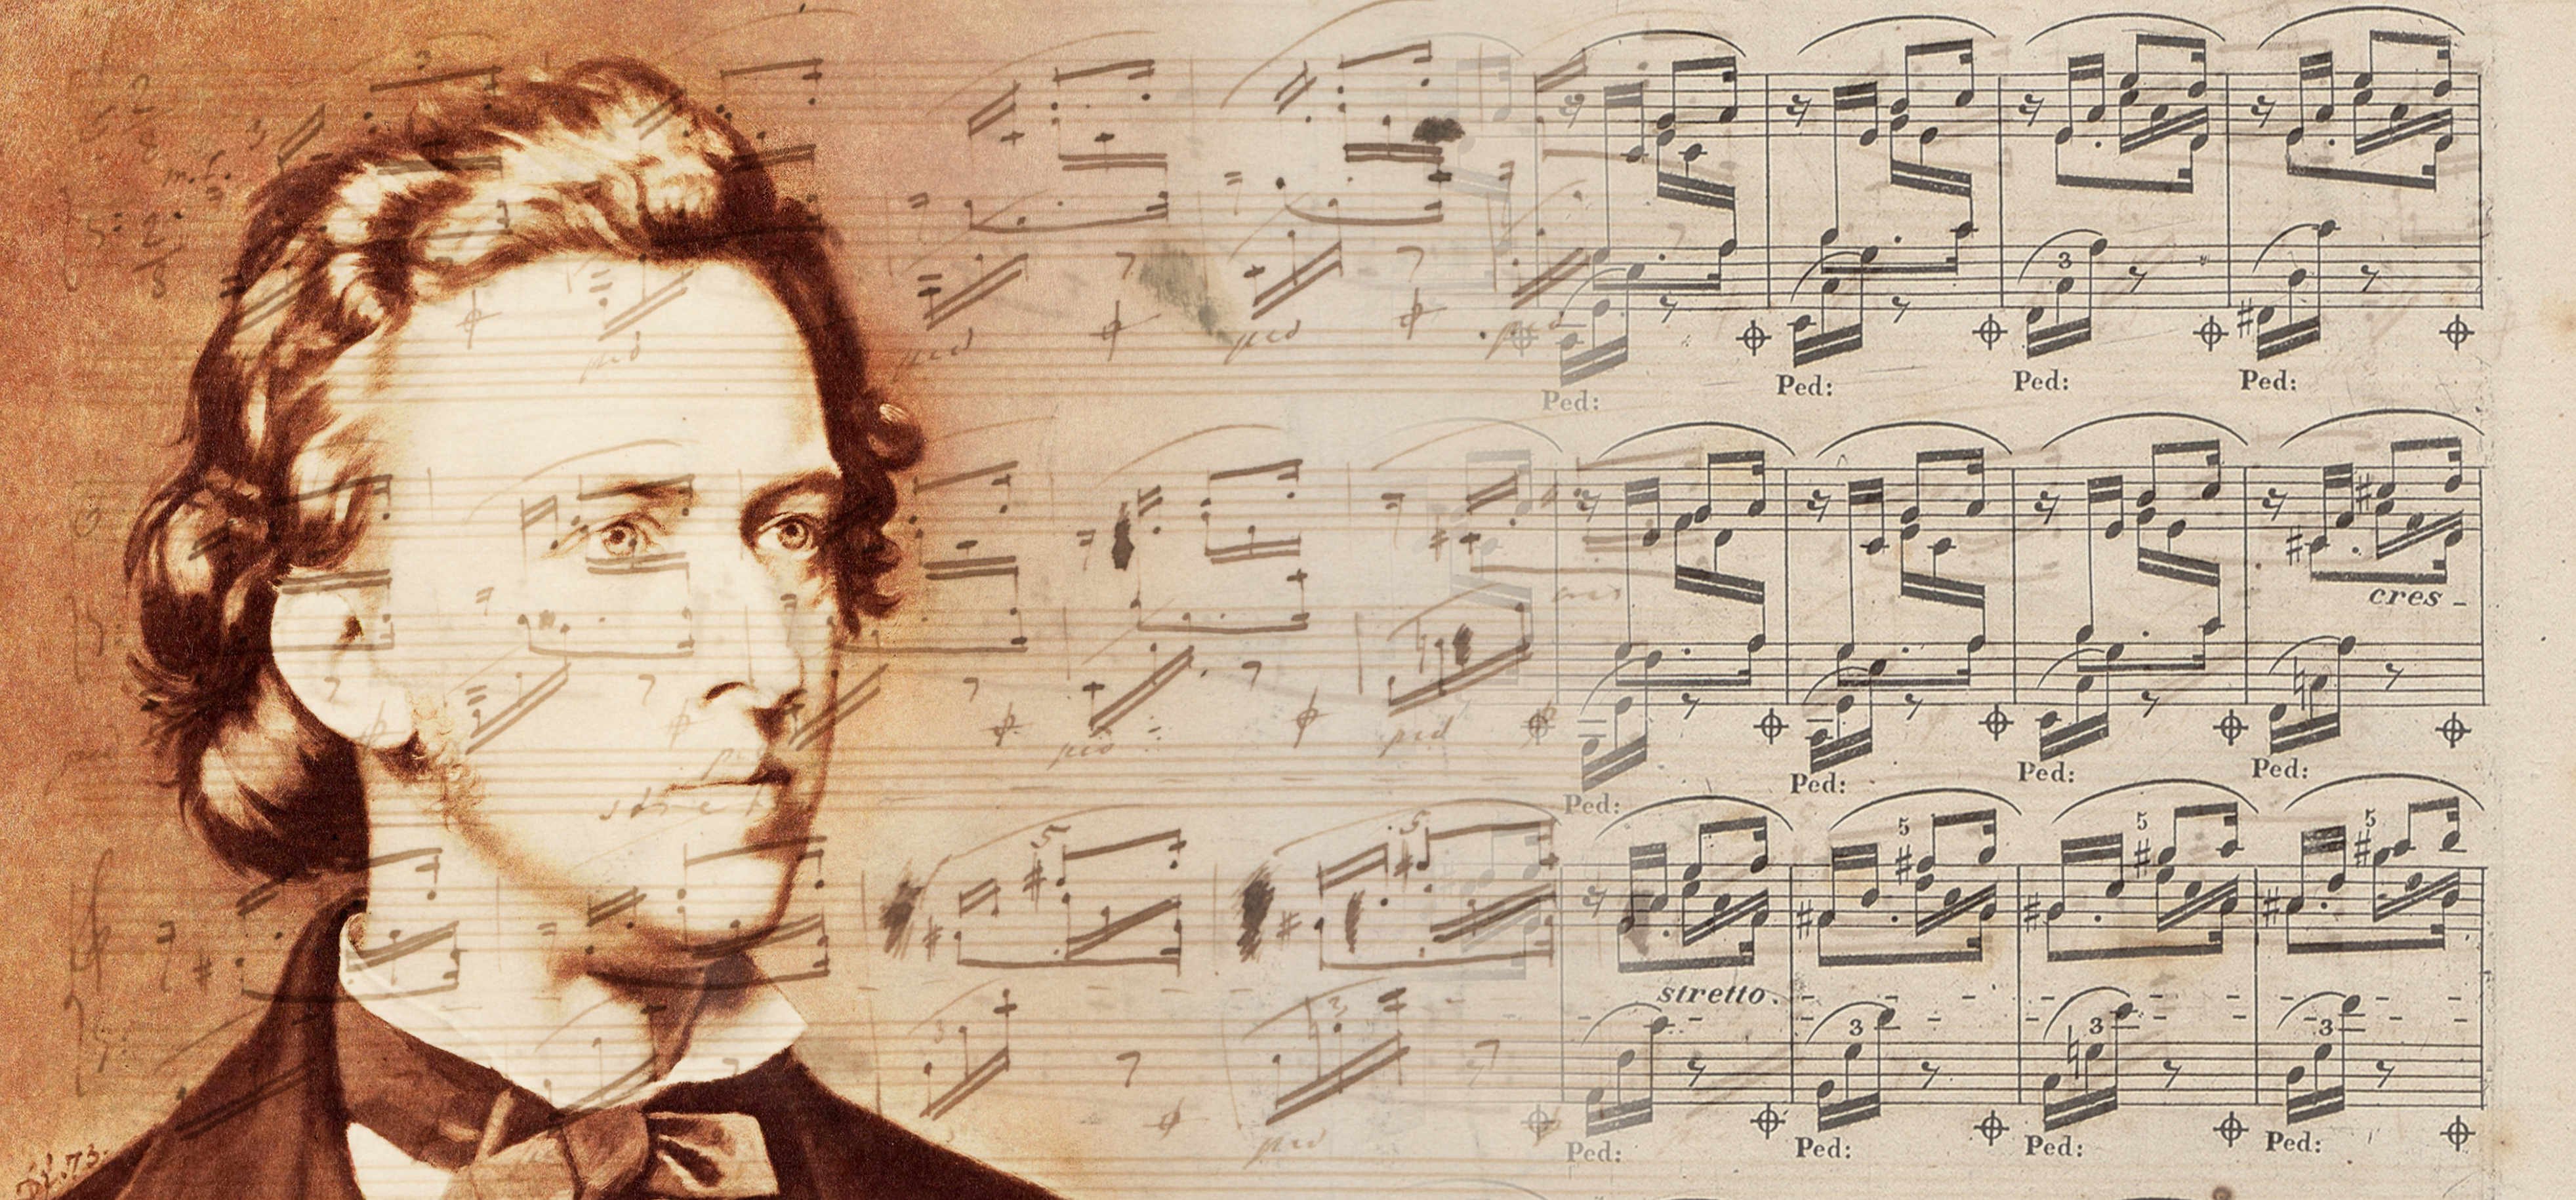 The portrait of composer Frédéric Chopin against a background of his own piano music notation